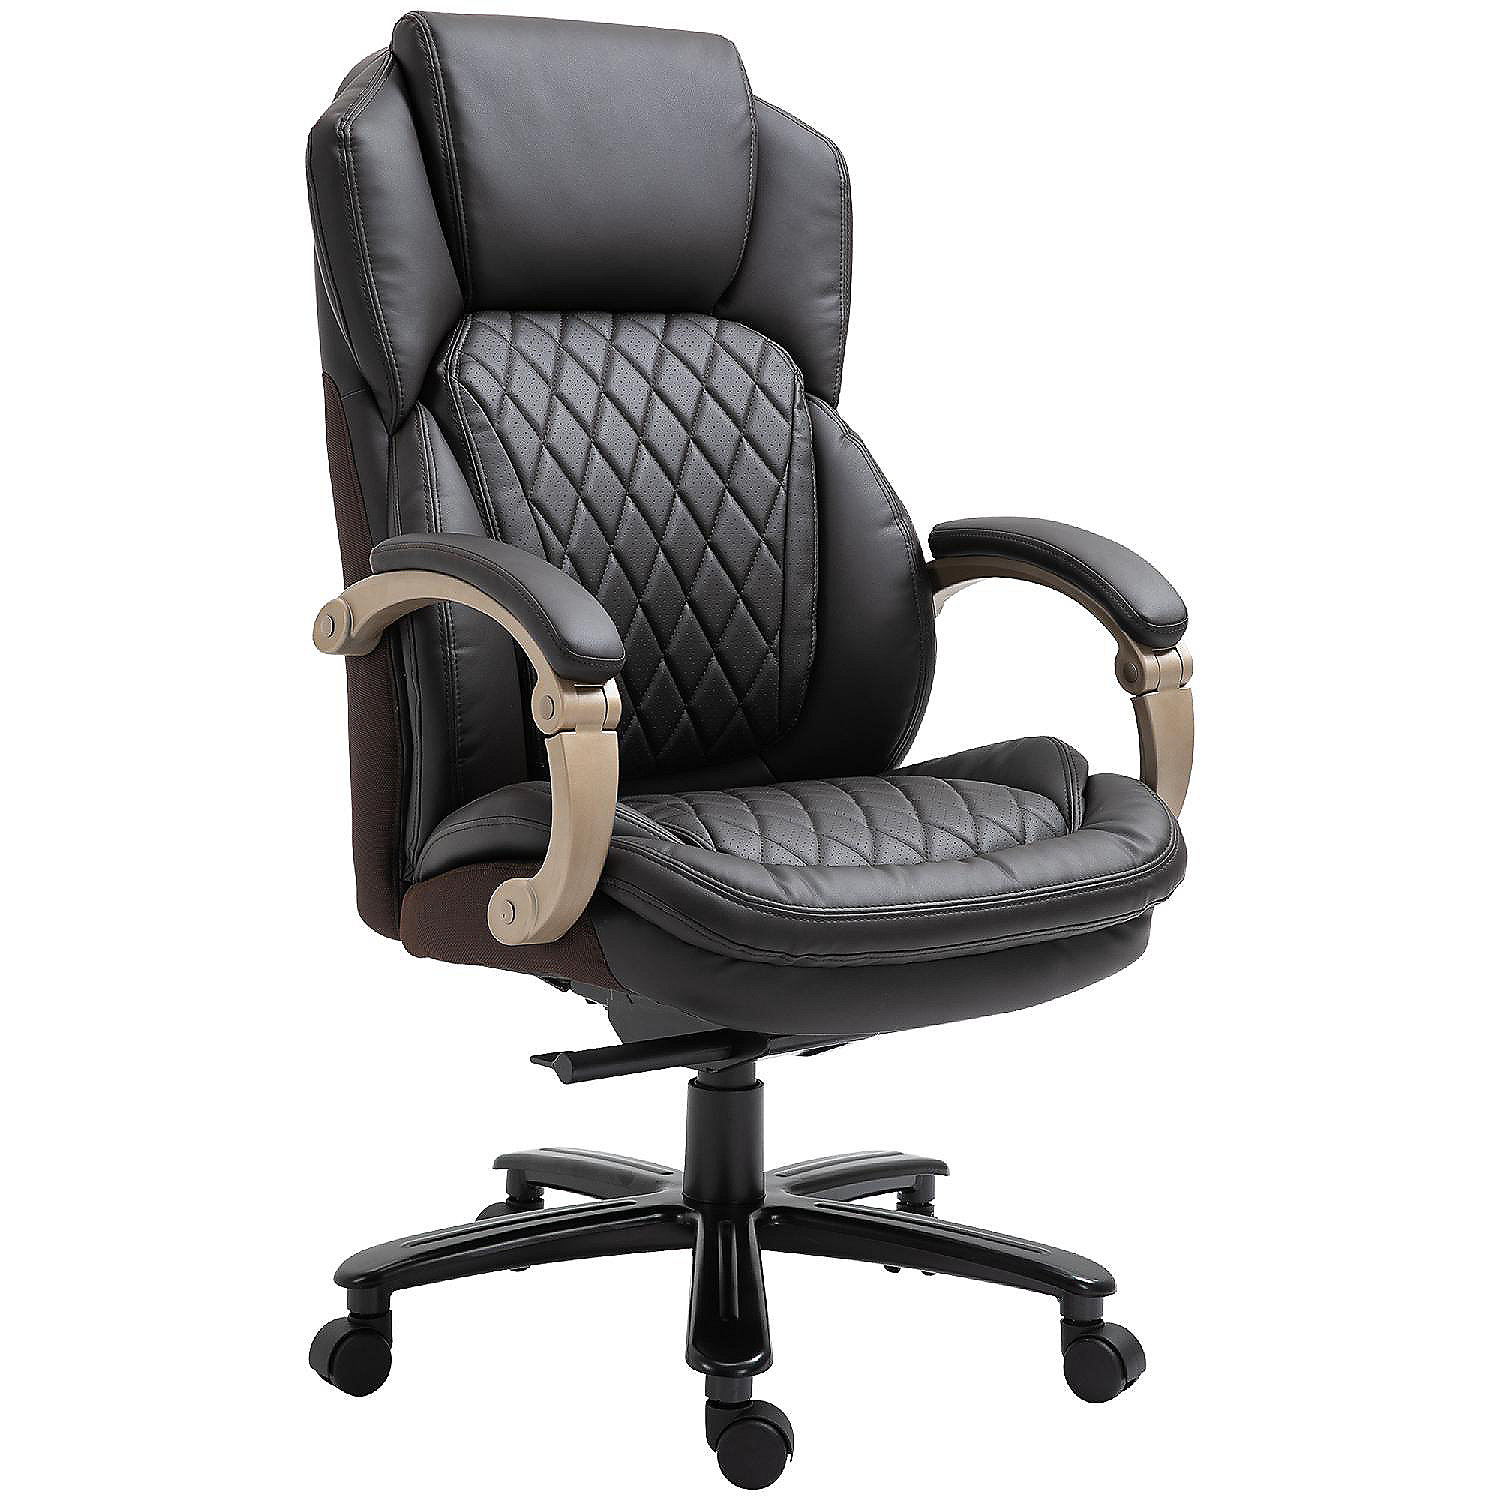 Vinsetto Big and Tall Executive Office Chair with Wide Seat Computer Desk  Chair with High Back Diamond Stitching Adjustable Height and Swivel Wheels  Brown | Oriental Trading